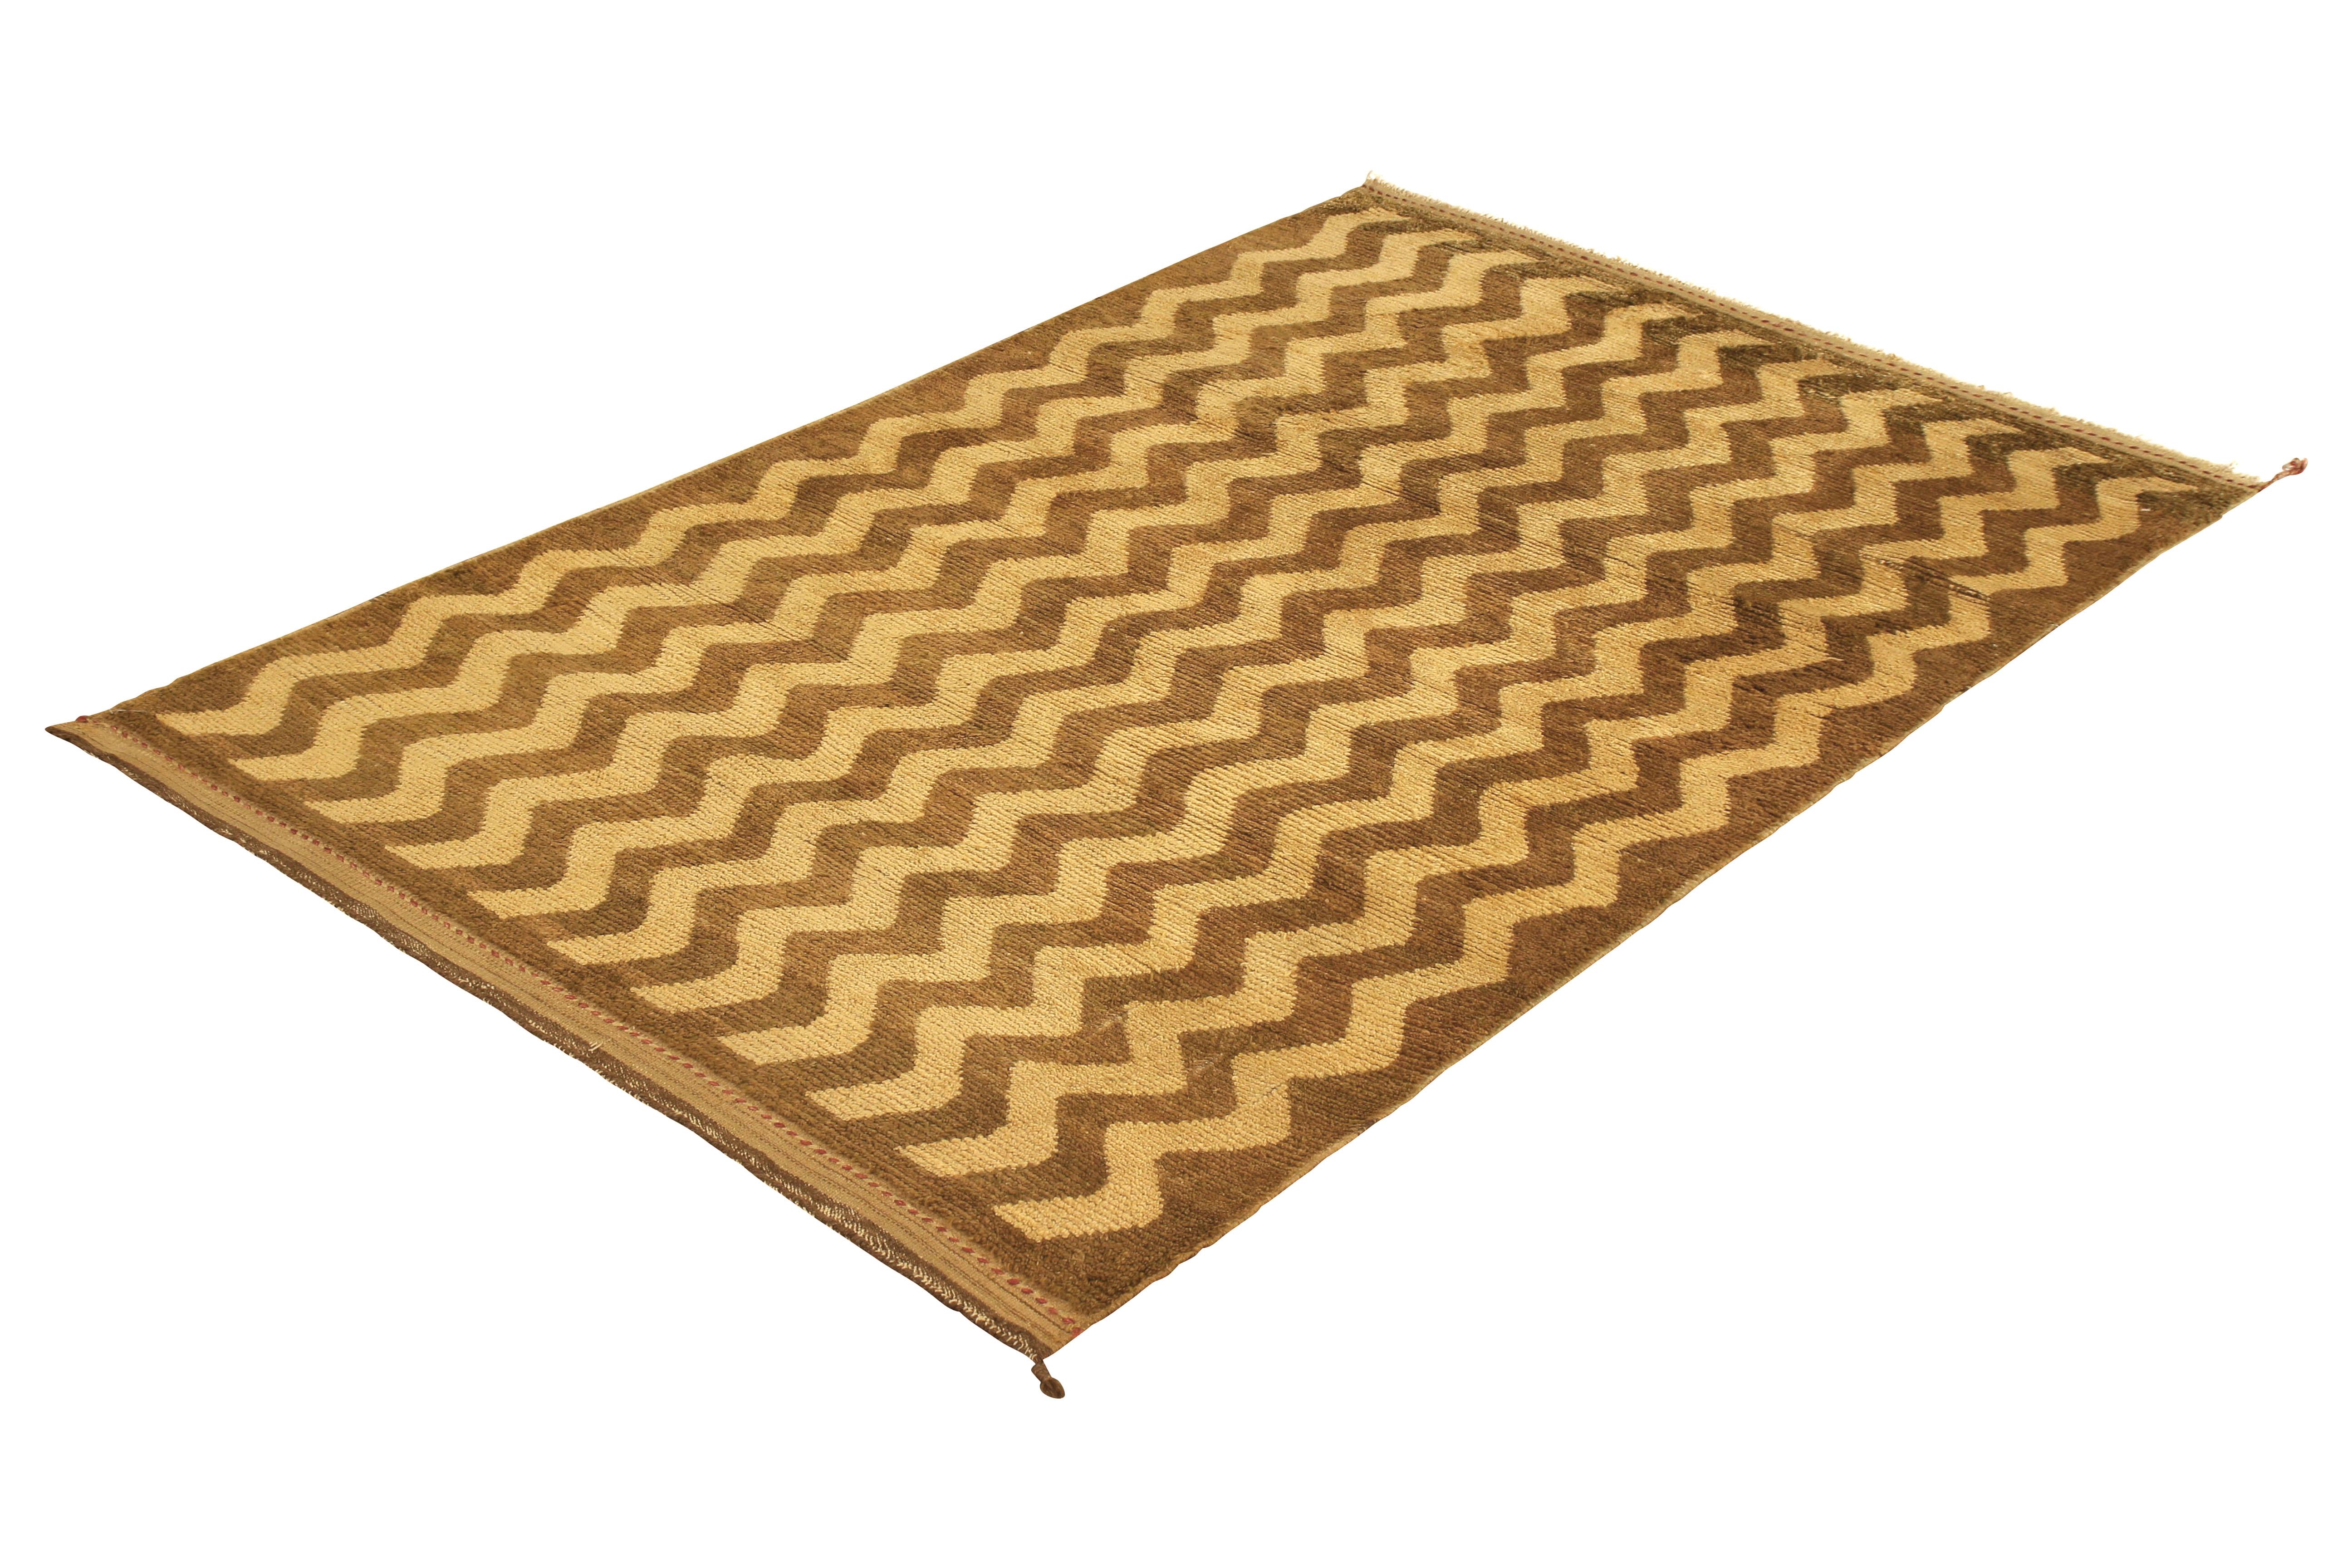 Hand knotted in wool originating from Turkey, circa 1950-1960, this vintage rug connotes a midcentury Tulu rug design, enjoying an idyllic Classic play of zig-zag chevron striped patterns with rich notes of brown and beige/camel colorway tones.